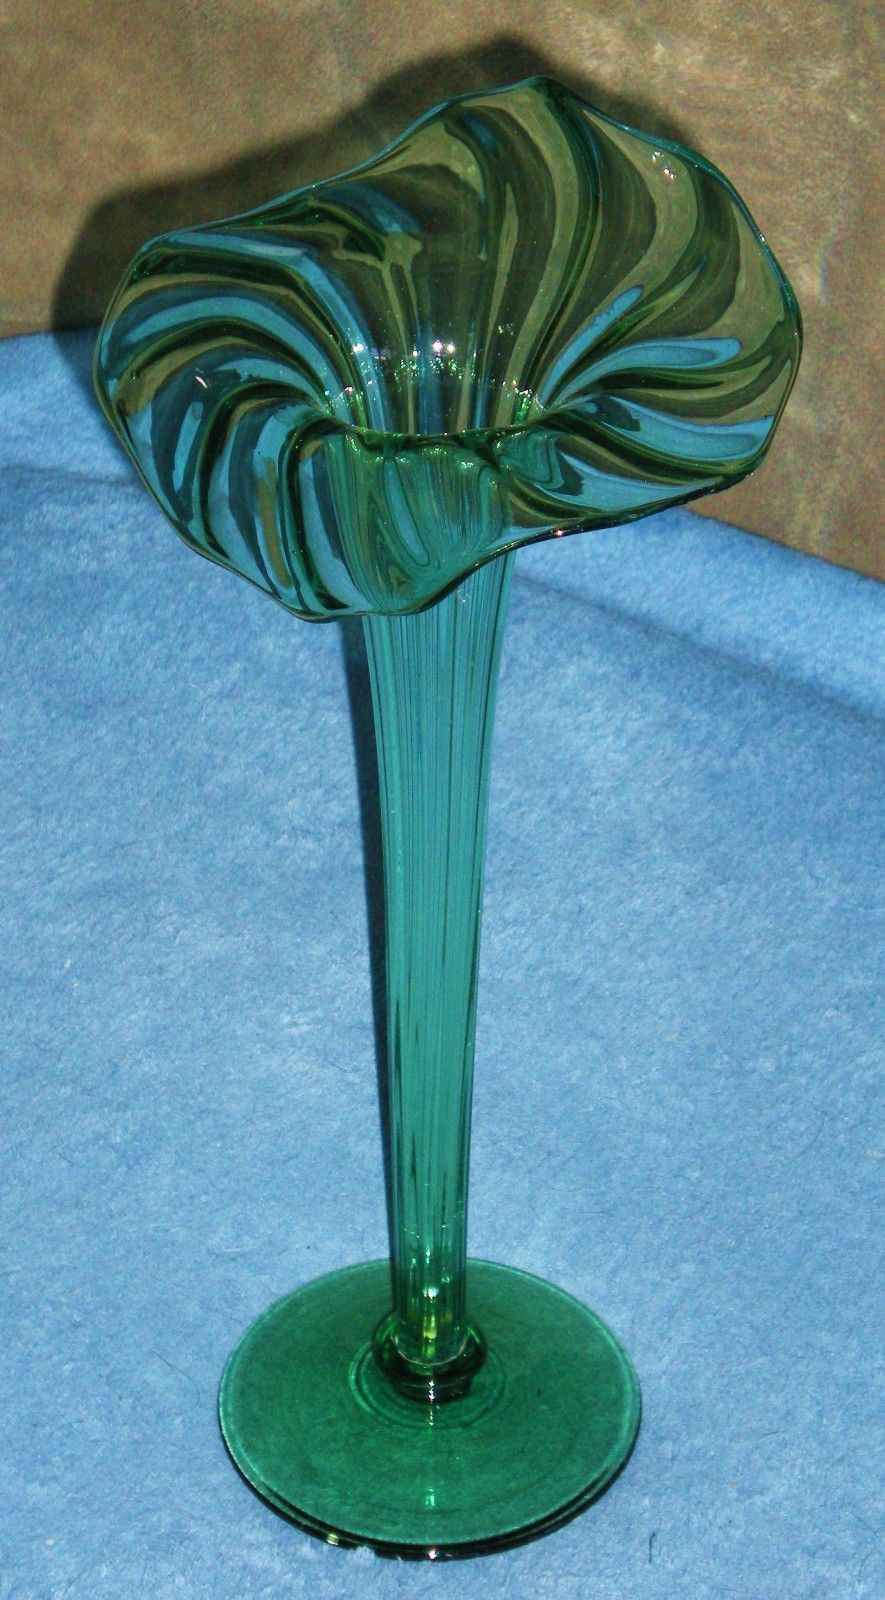 25 Perfect Lenox Crystal Vase 2024 free download lenox crystal vase of fenton nil satin burmese glass fern and daisy vase with ruffled pertaining to hand blown fenton tall emerald green glass jack in the pulpit vase